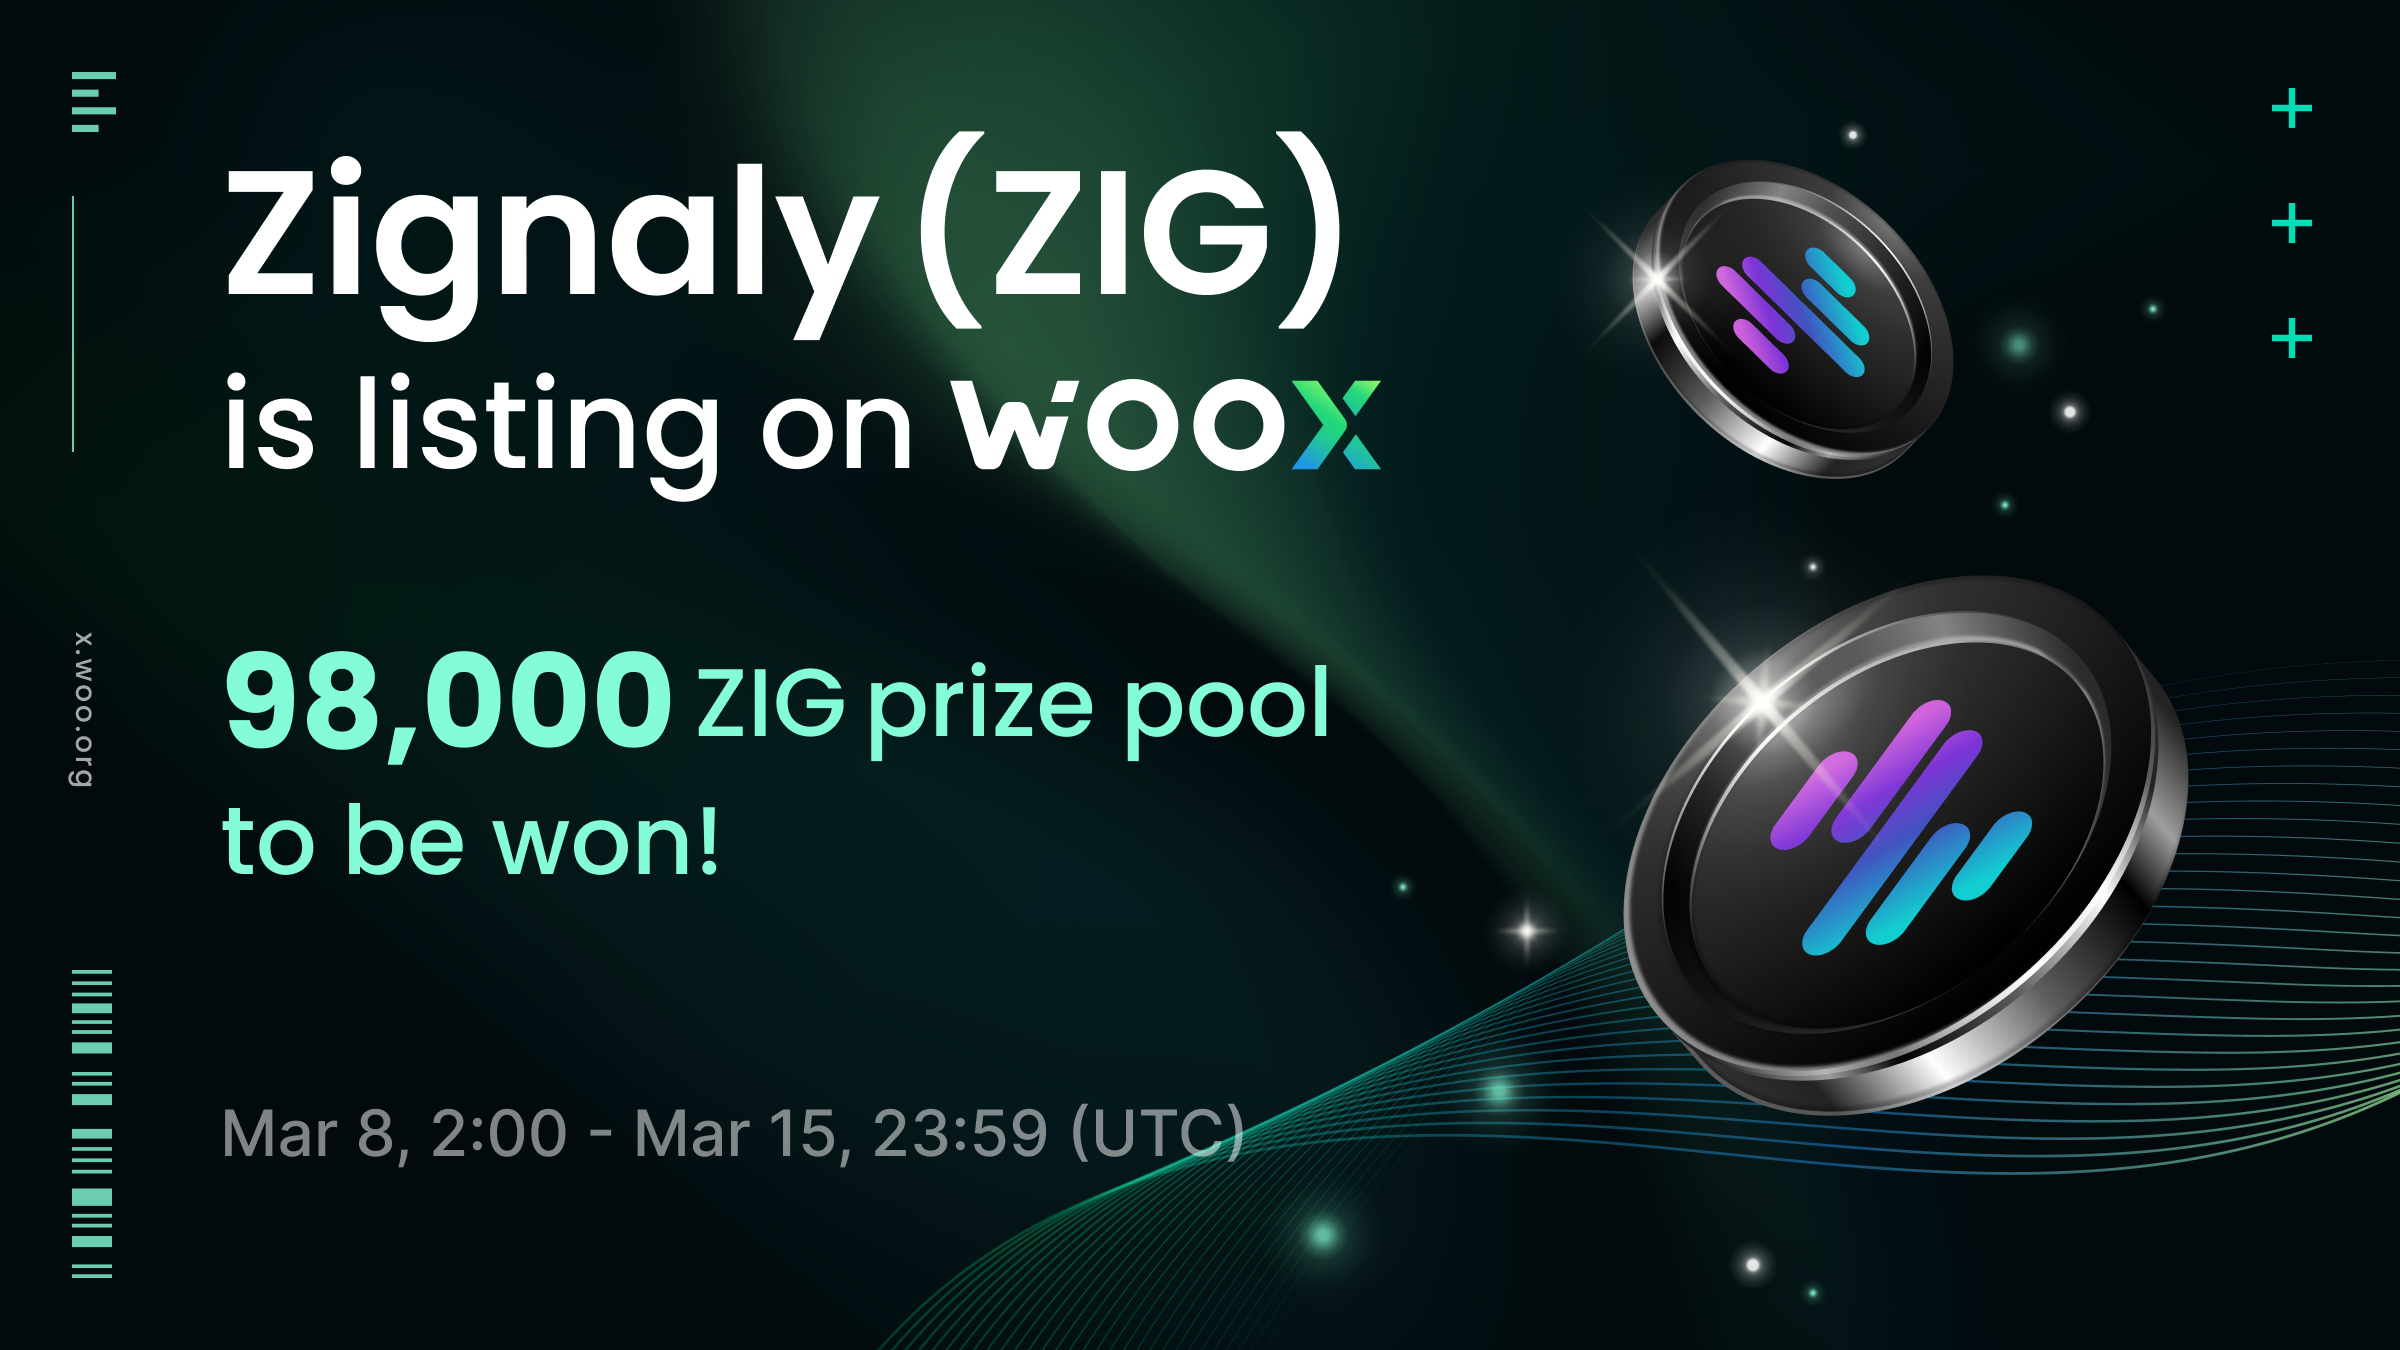 New Listing: Zignaly (ZIG) on WOO X - Trade and share a 98,000 ZIG prize pool!